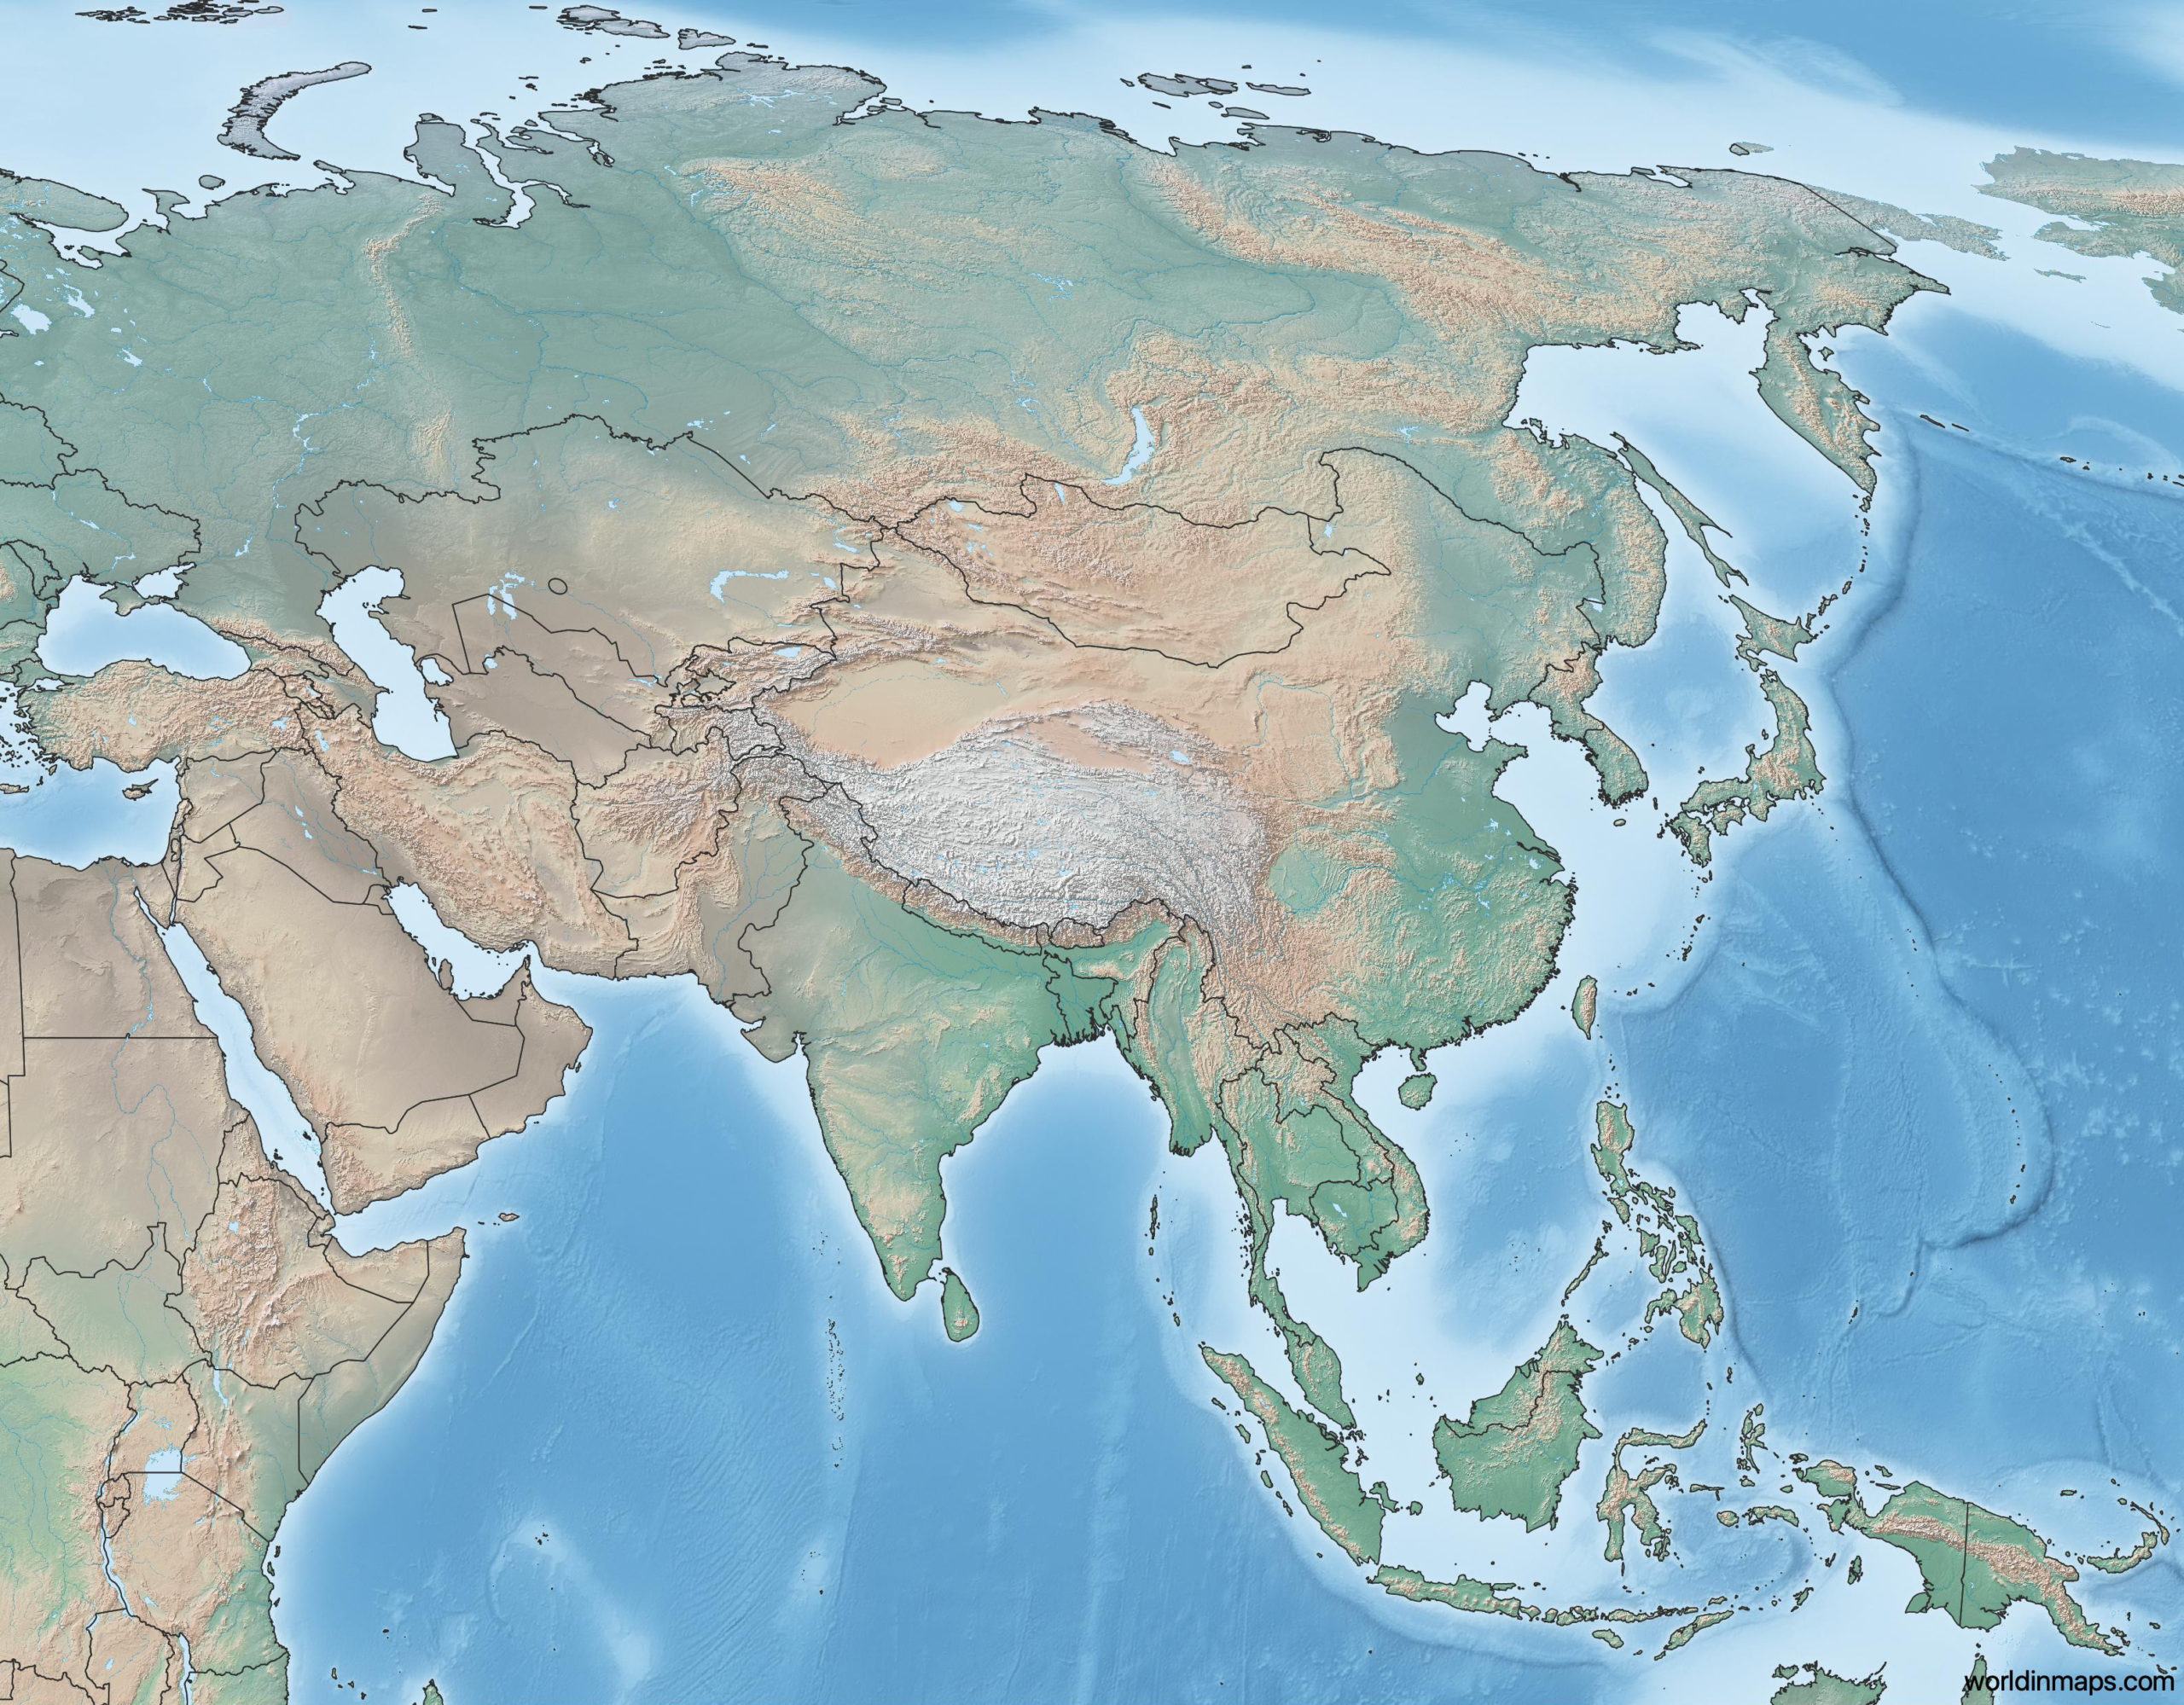 Map Of Asia Geography 88 World Maps - Bank2home.com